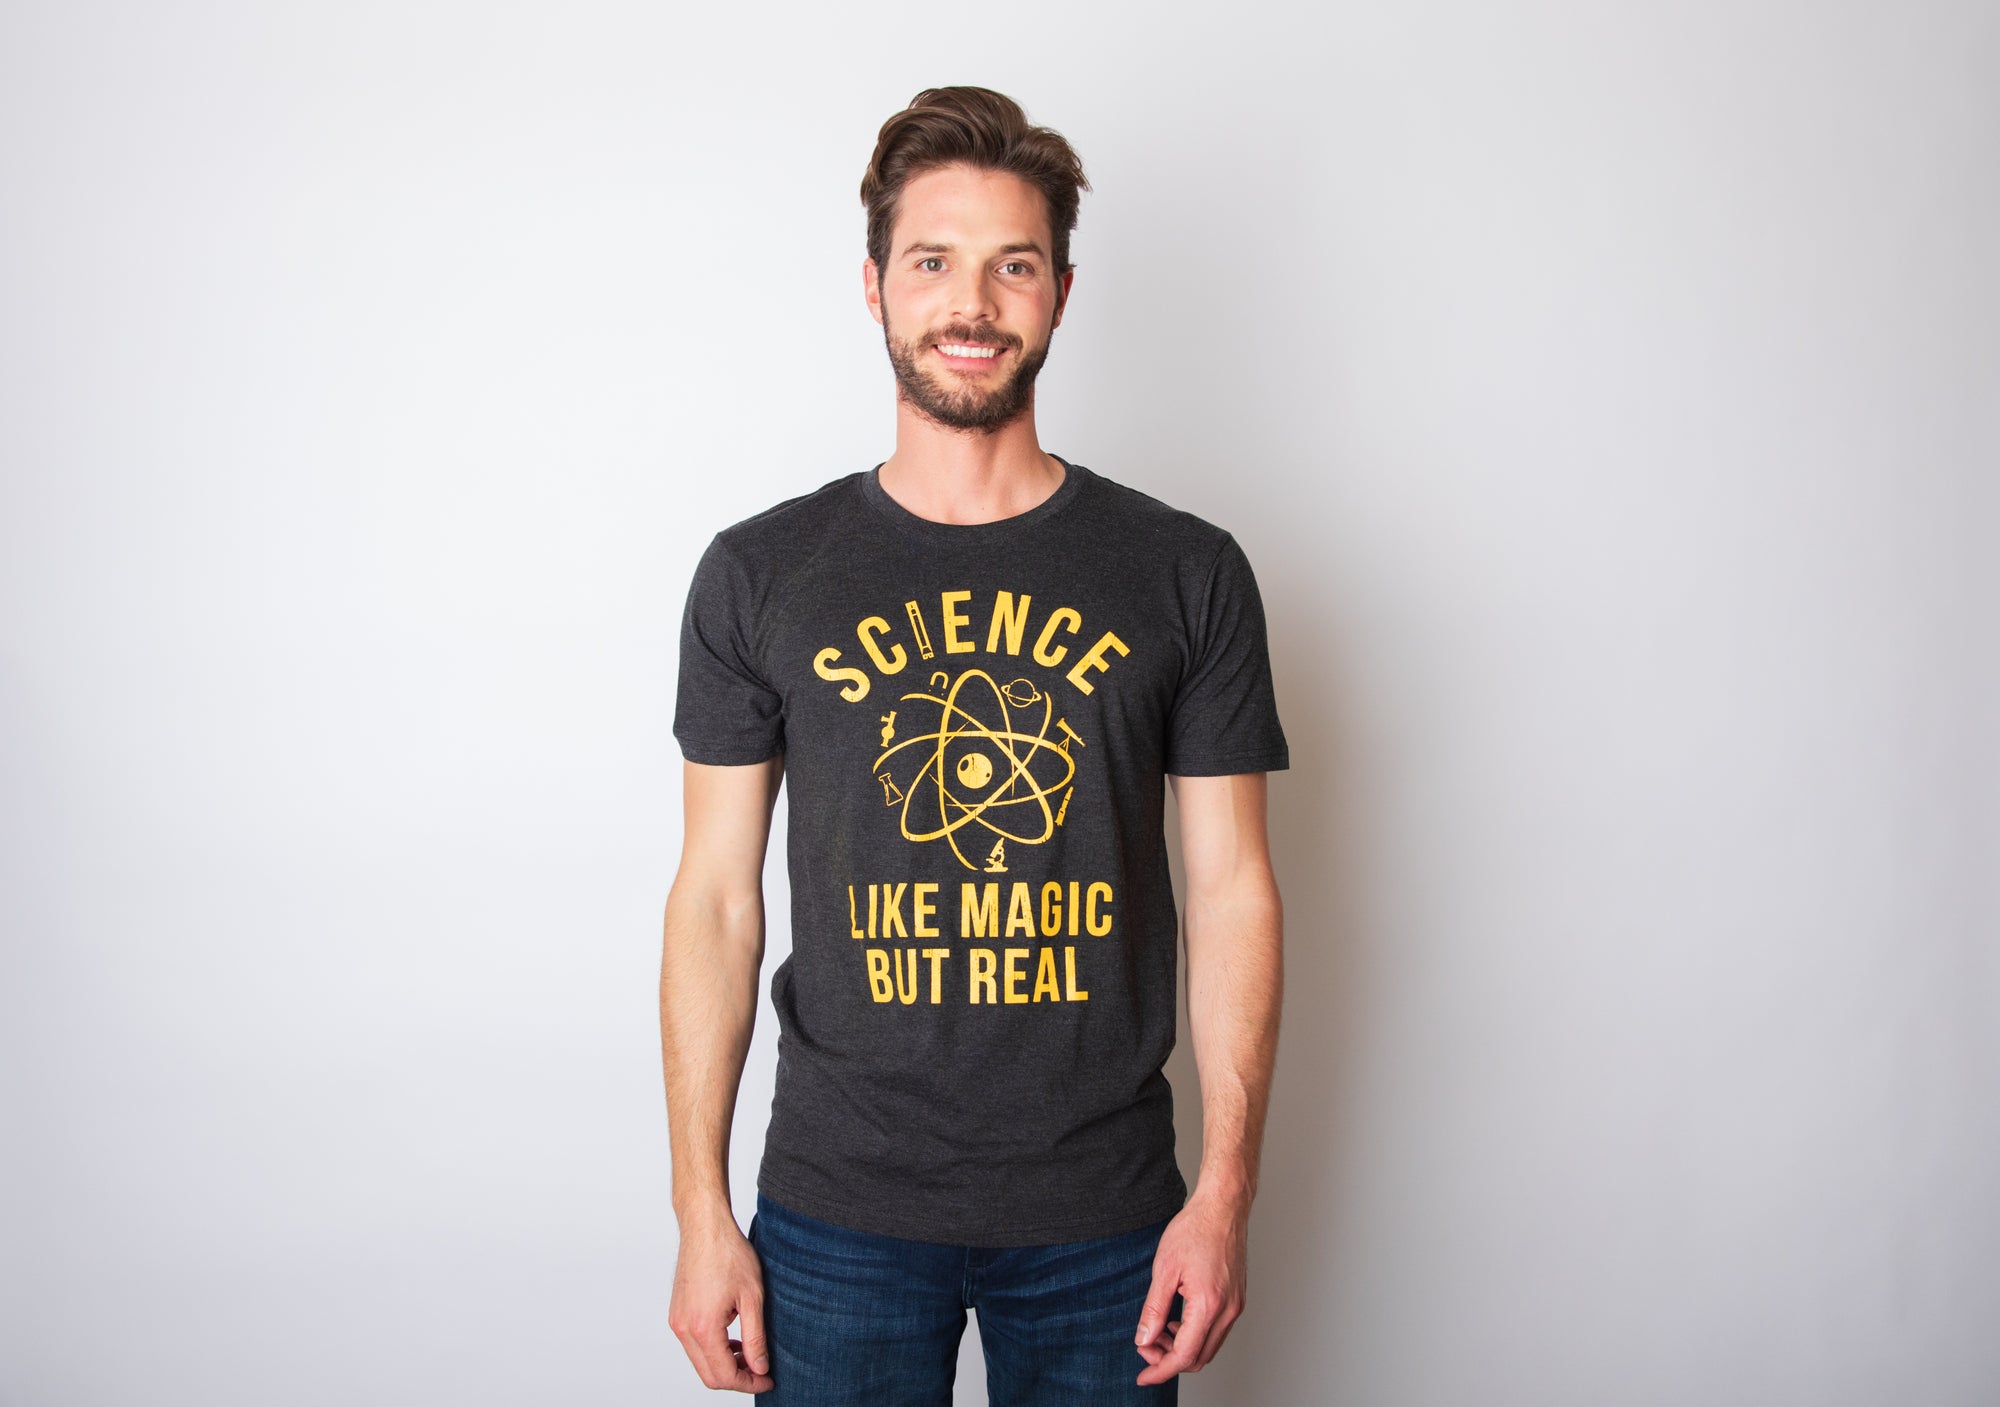 Funny Heather Black Science: Like Magic But Real Mens T Shirt Nerdy Science Nerdy Tee